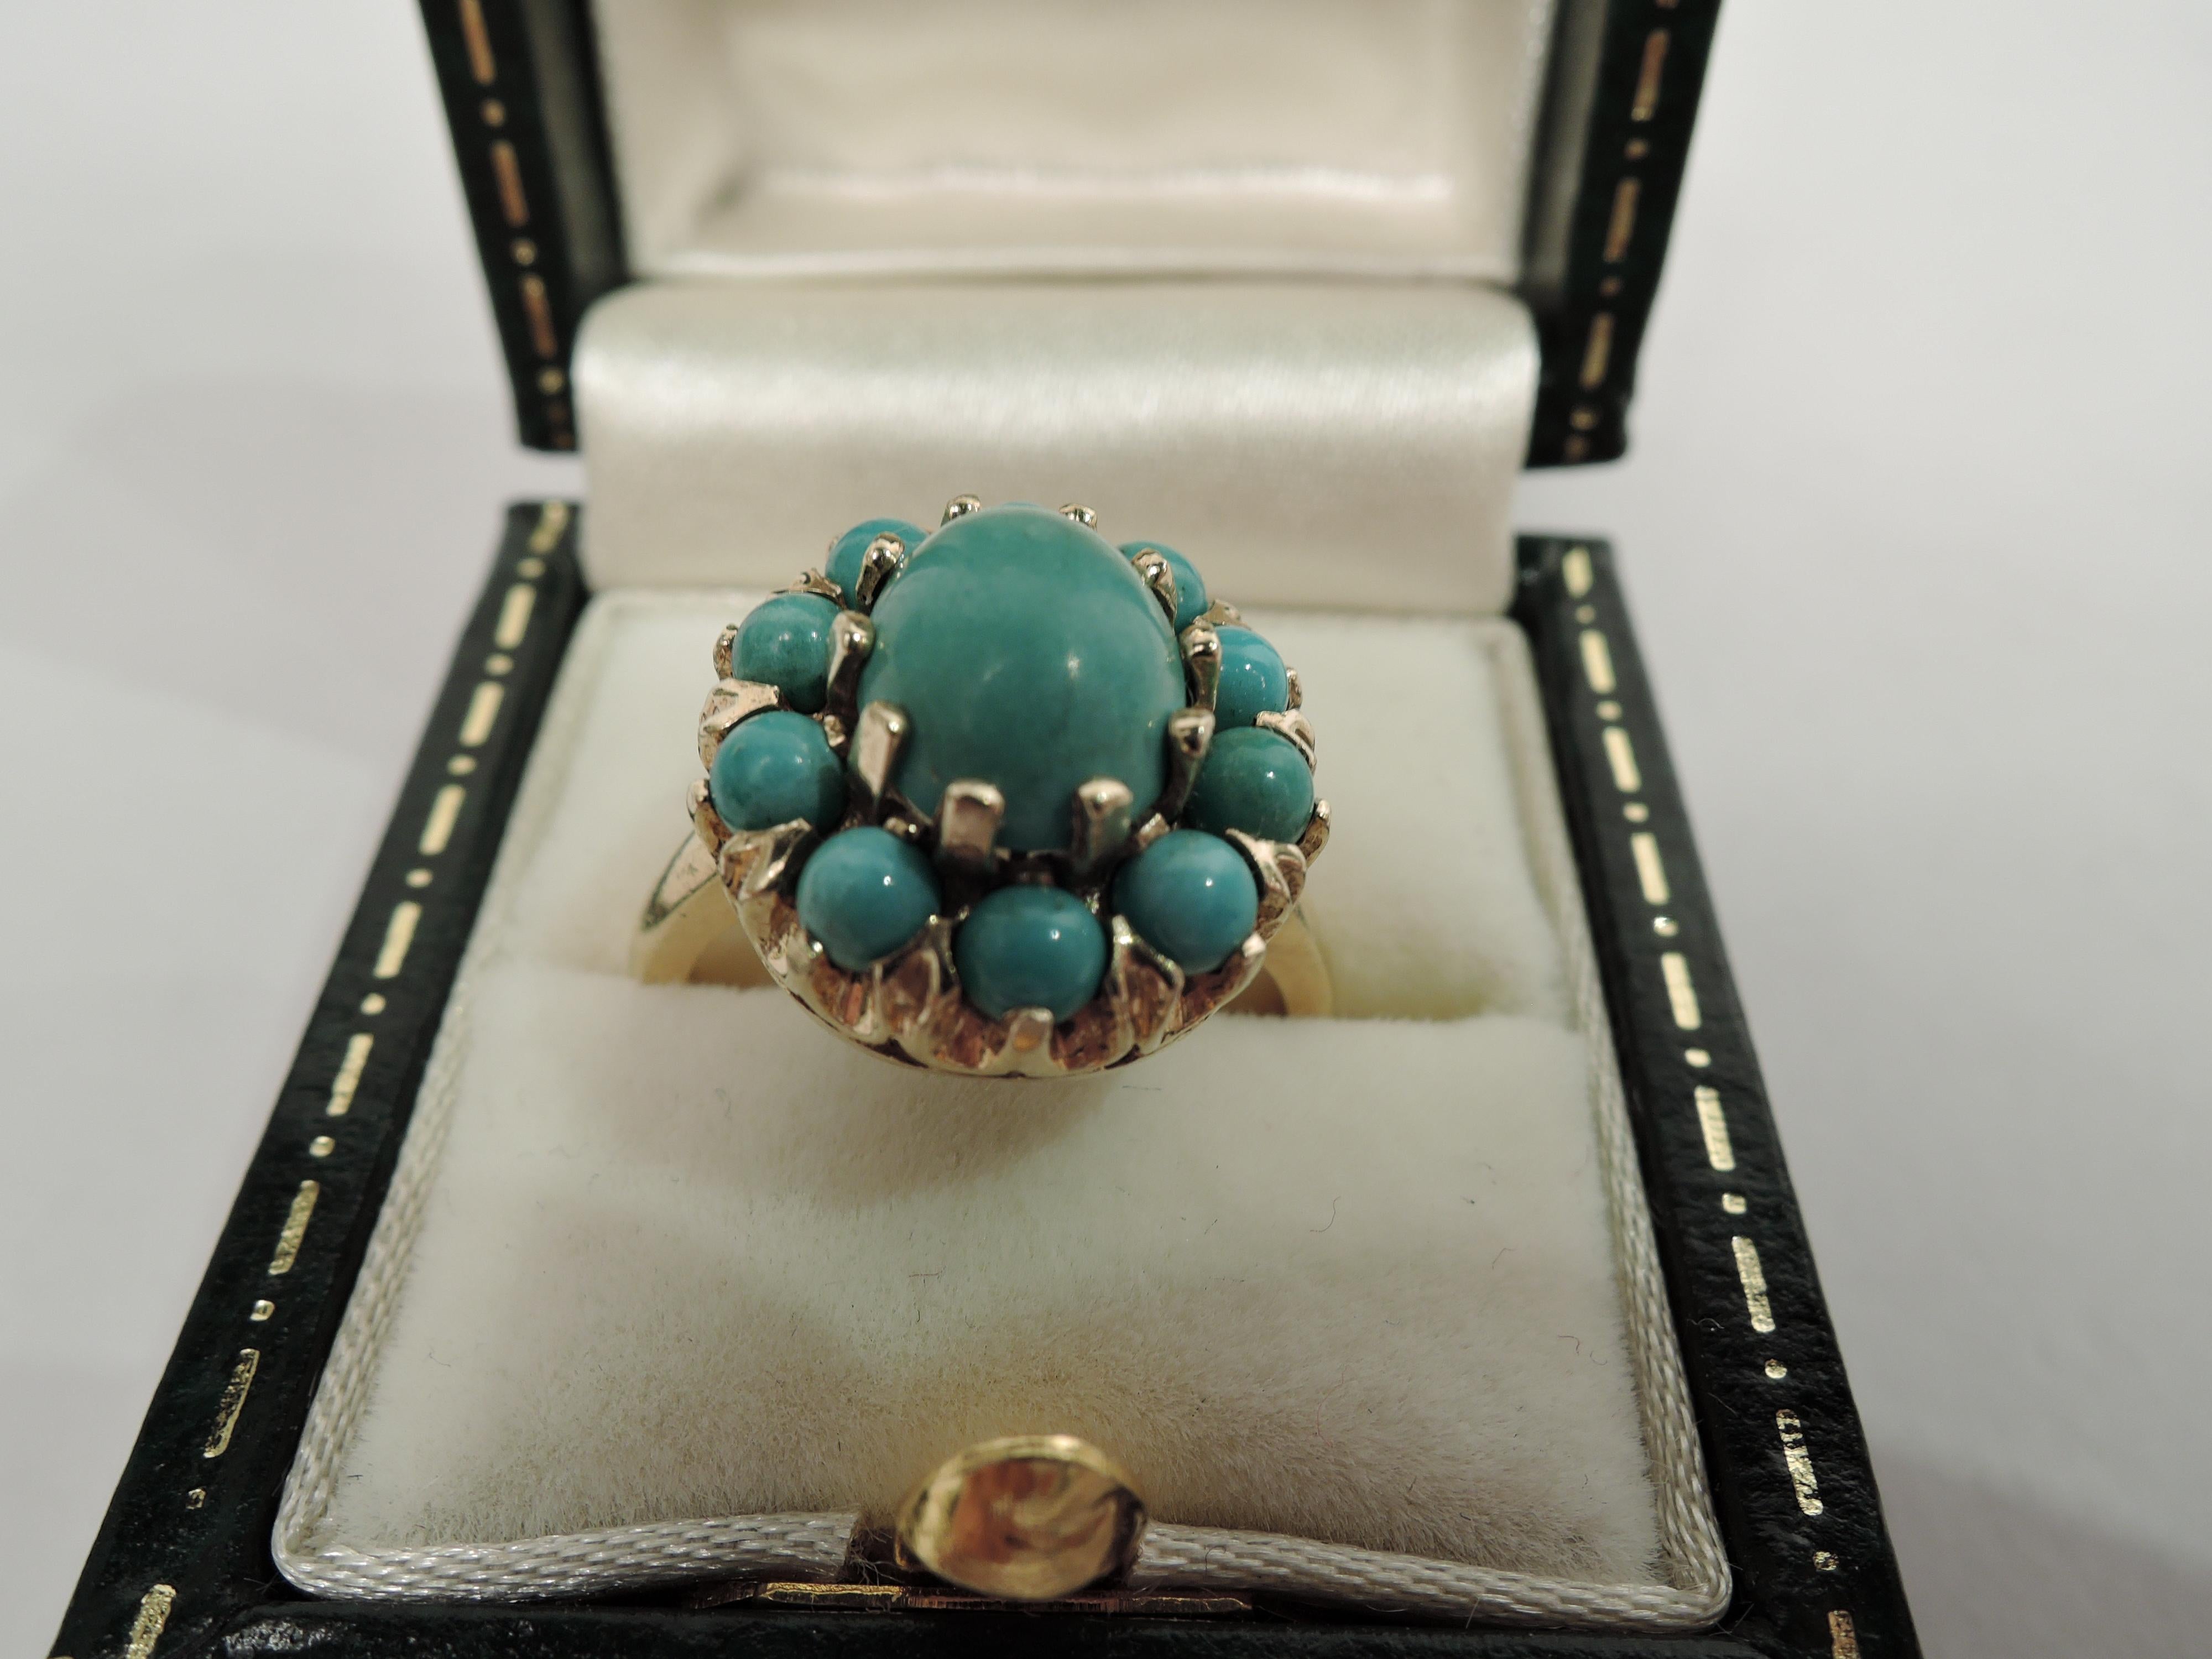 Lovely American lady’s ring. Oval turquoise bordered by ten small and round turquoise beads. Band is 14k yellow gold. United States, ca 1940s. Hallmarked.